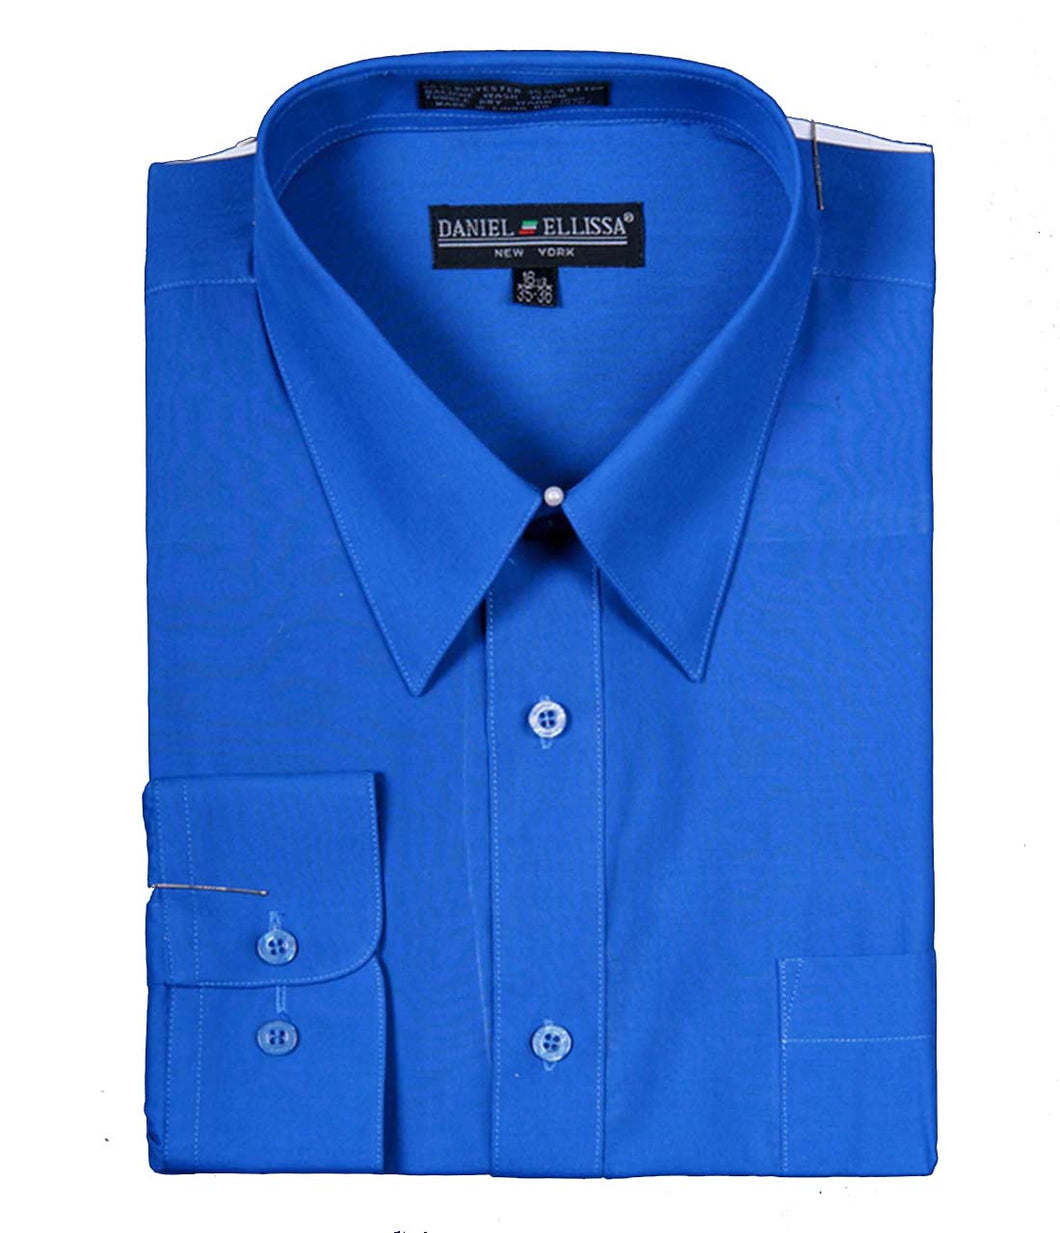 Men's Basic Dress Shirt  with Convertible Cuff -Color Royal Blue